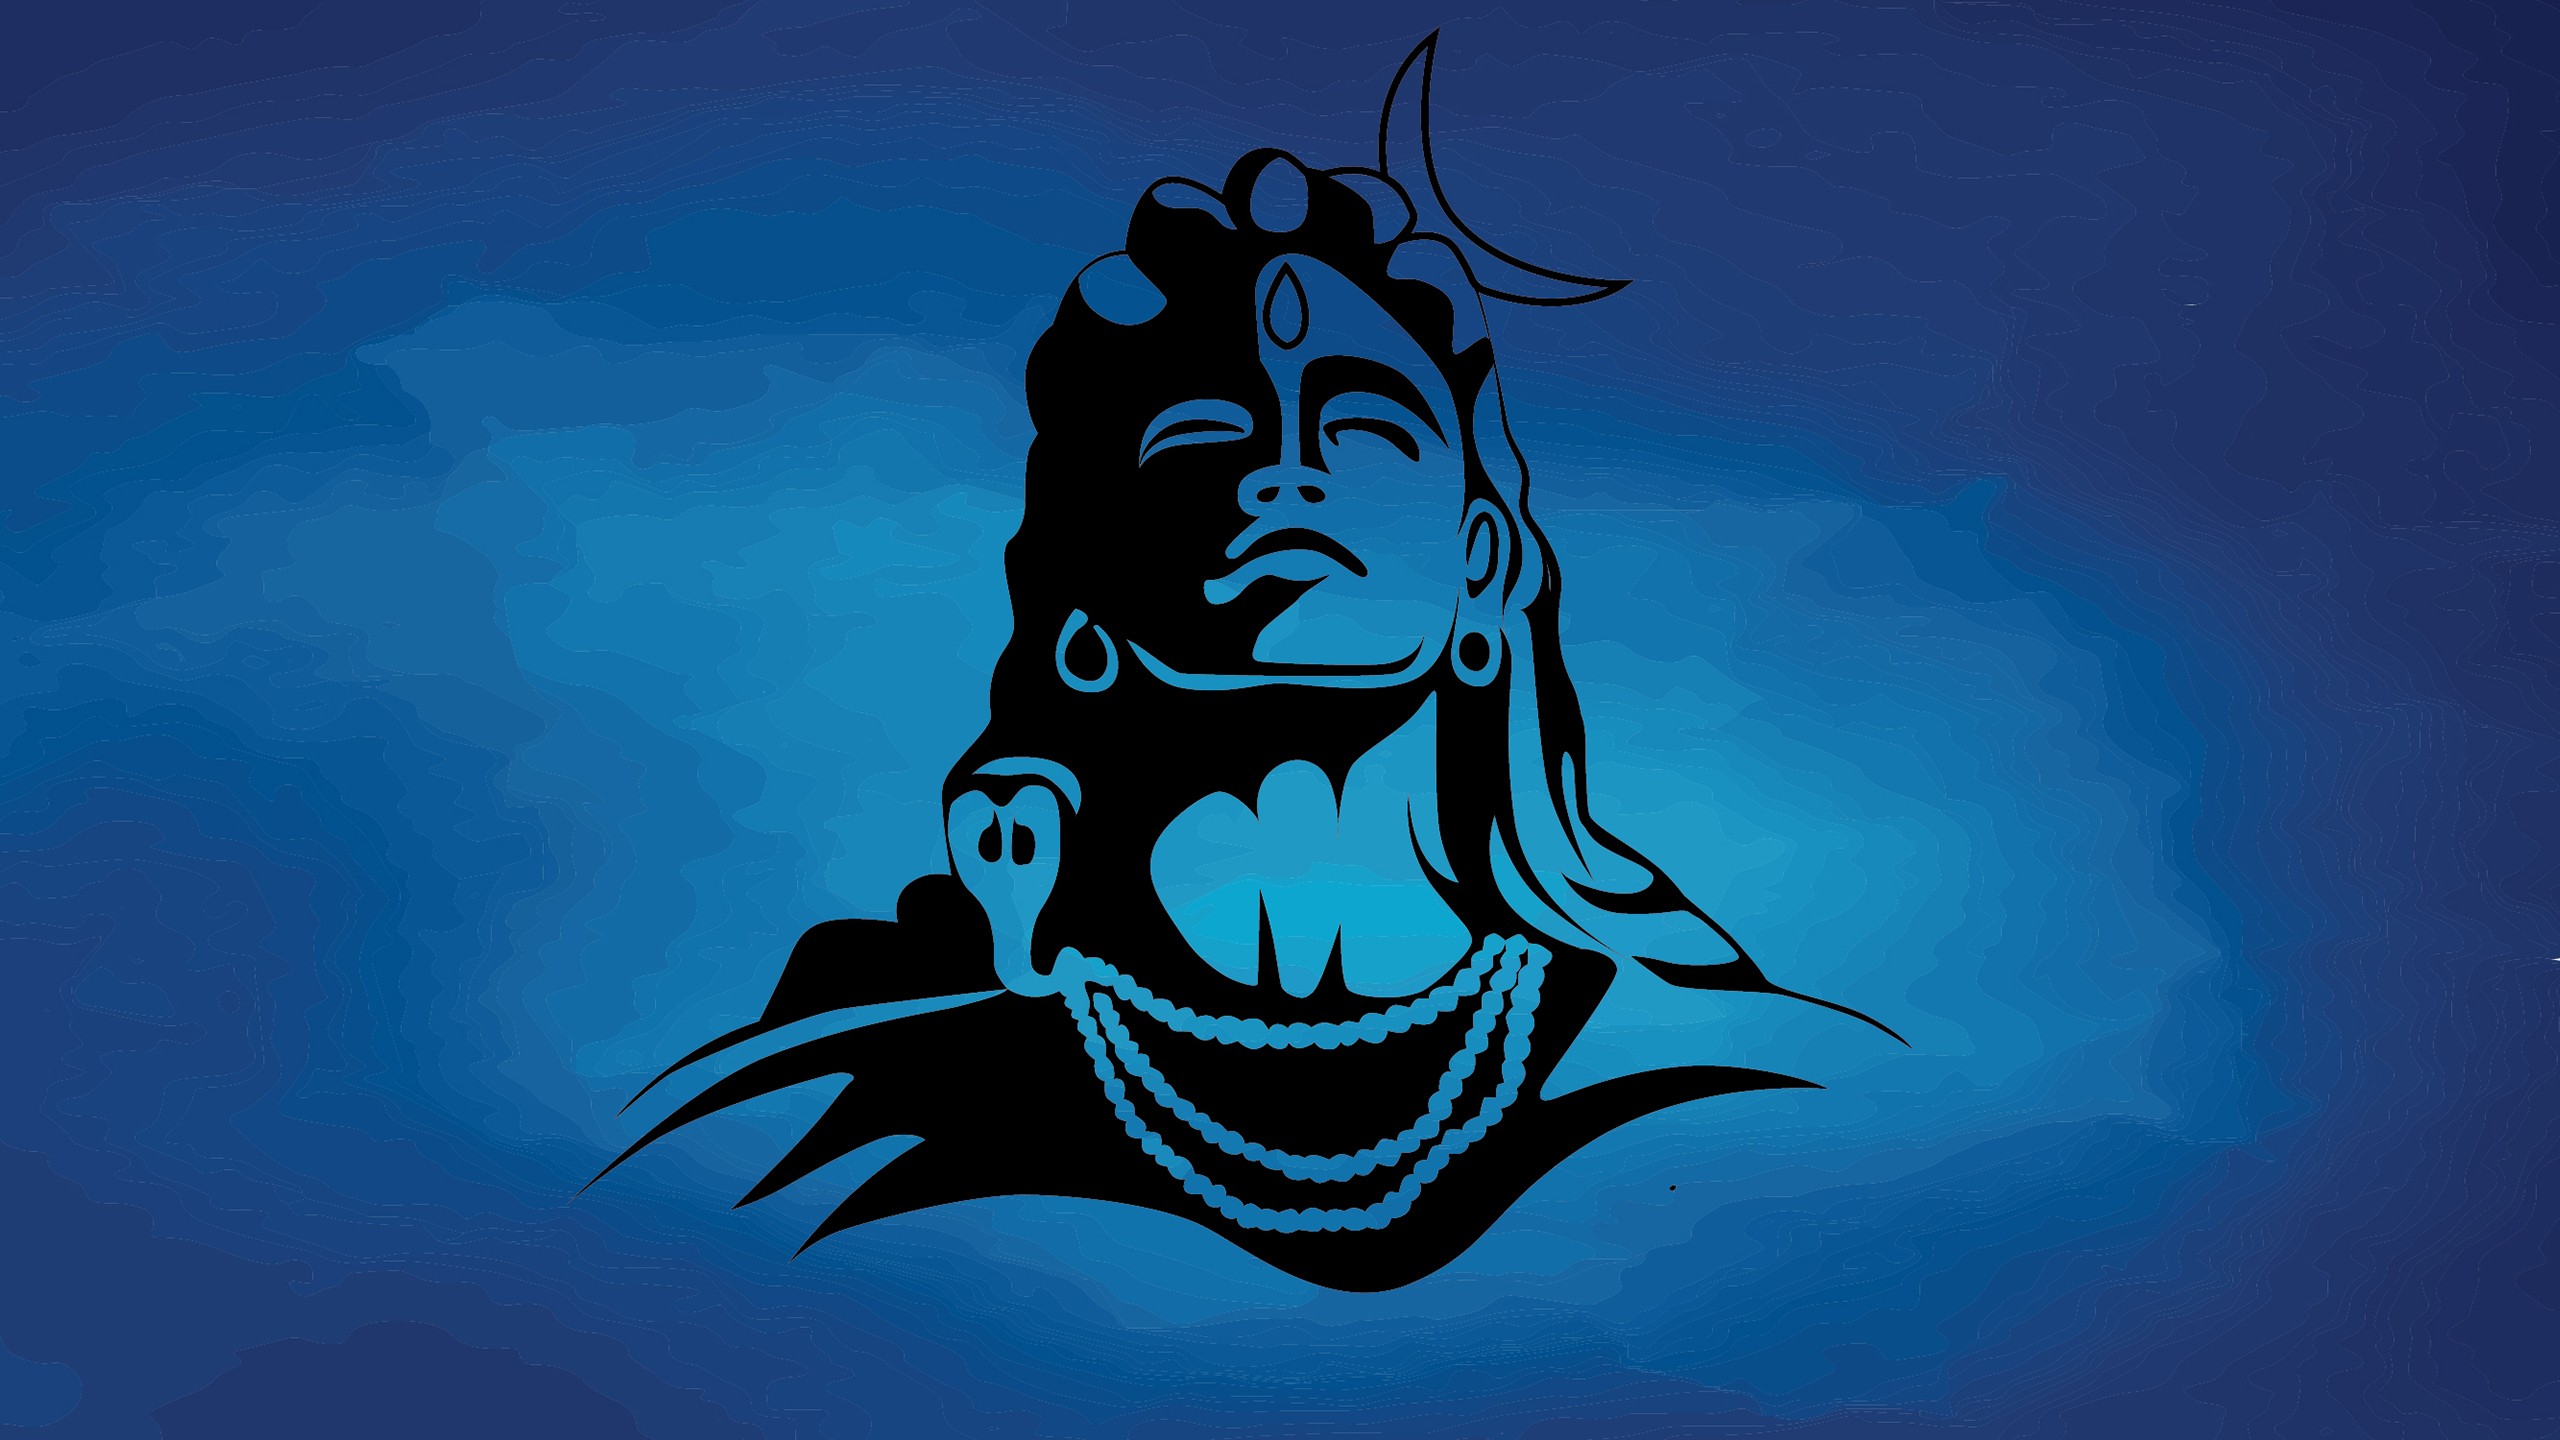 Lord Shiva Wallpapers | HD Wallpapers